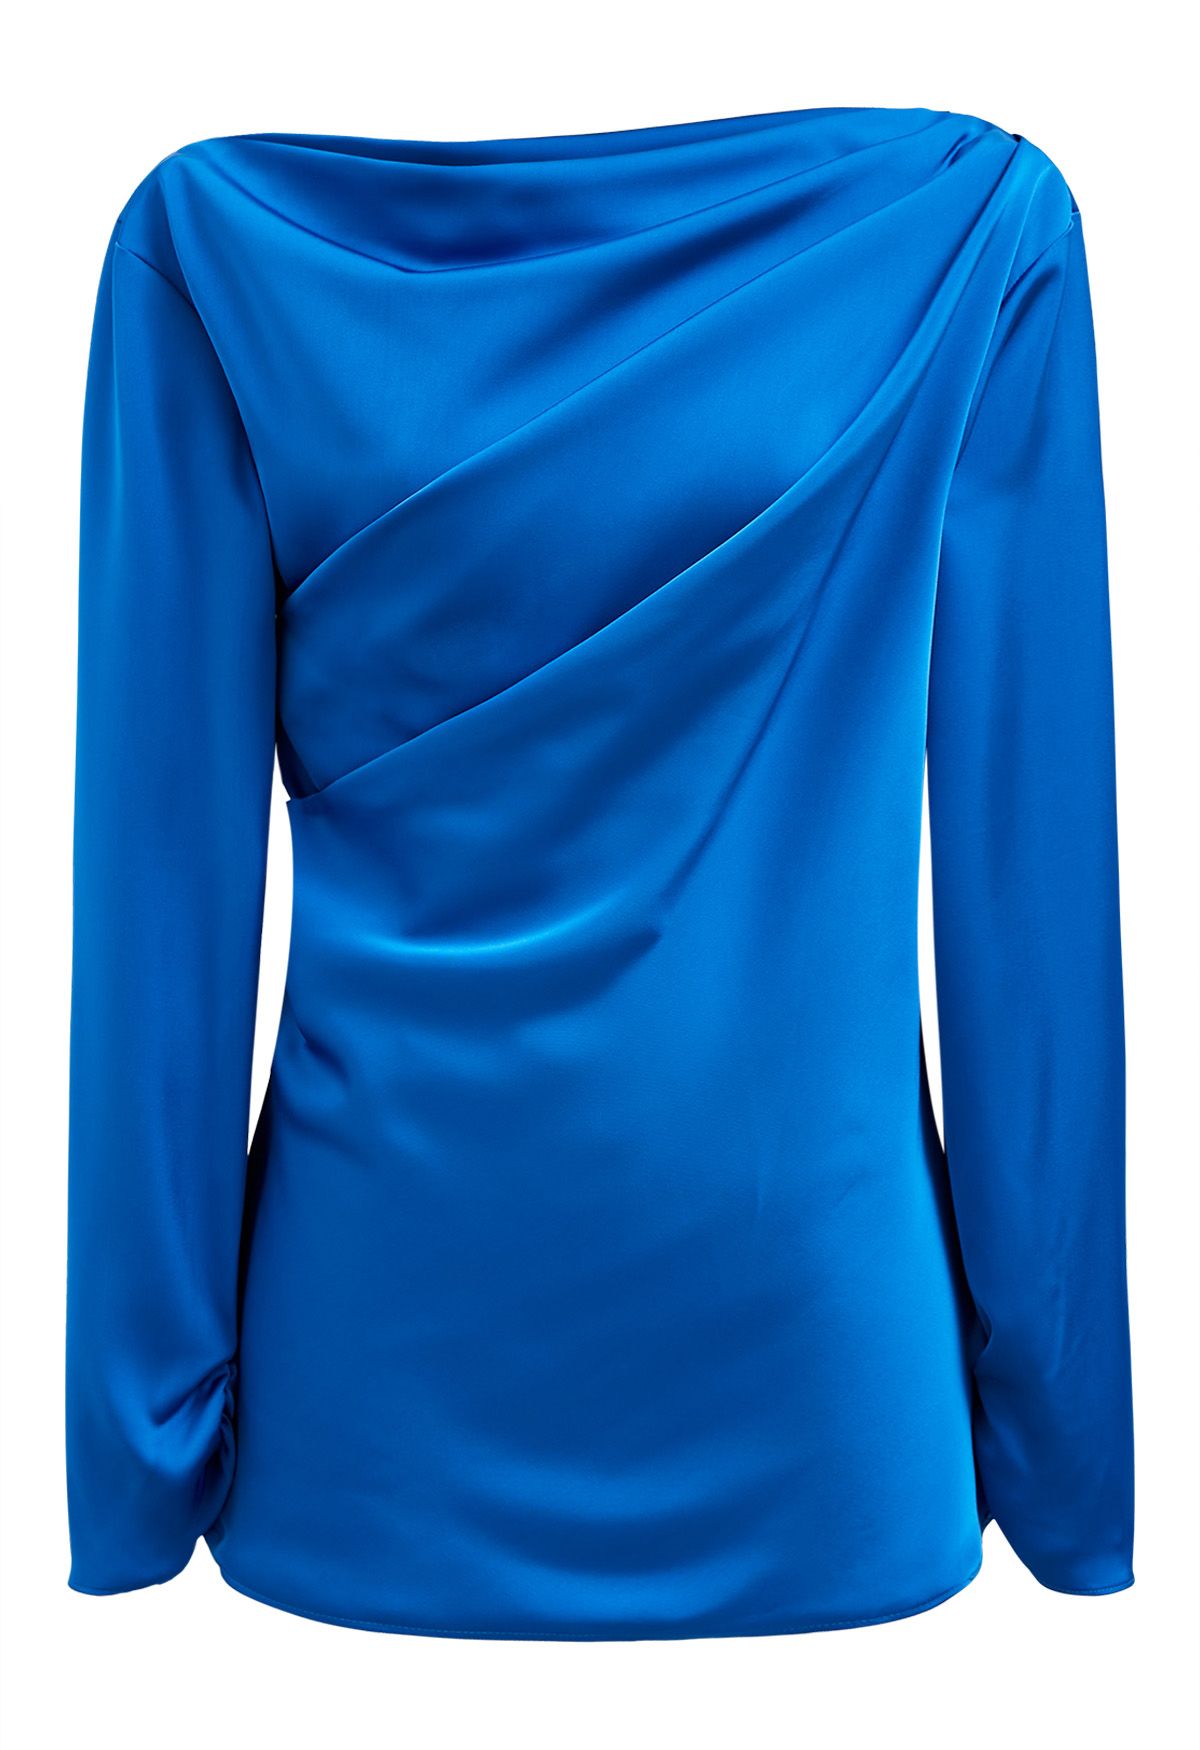 Asymmetric Ruched Satin Long Sleeve Top in Blue